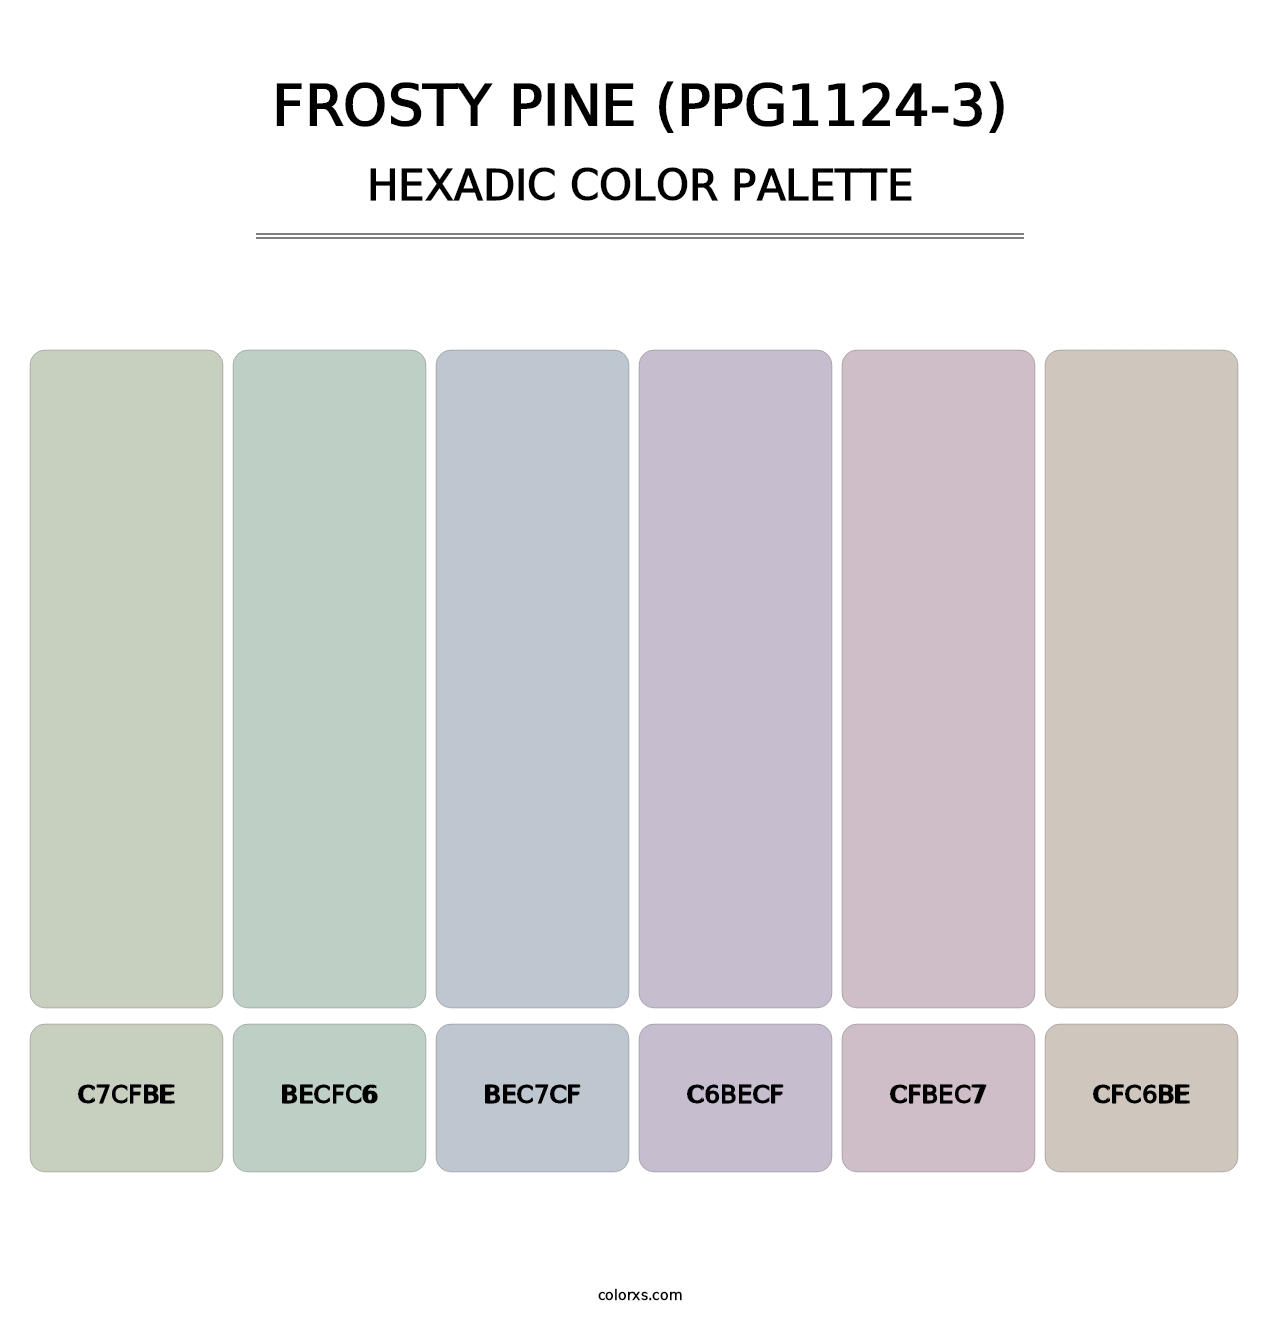 Frosty Pine (PPG1124-3) - Hexadic Color Palette